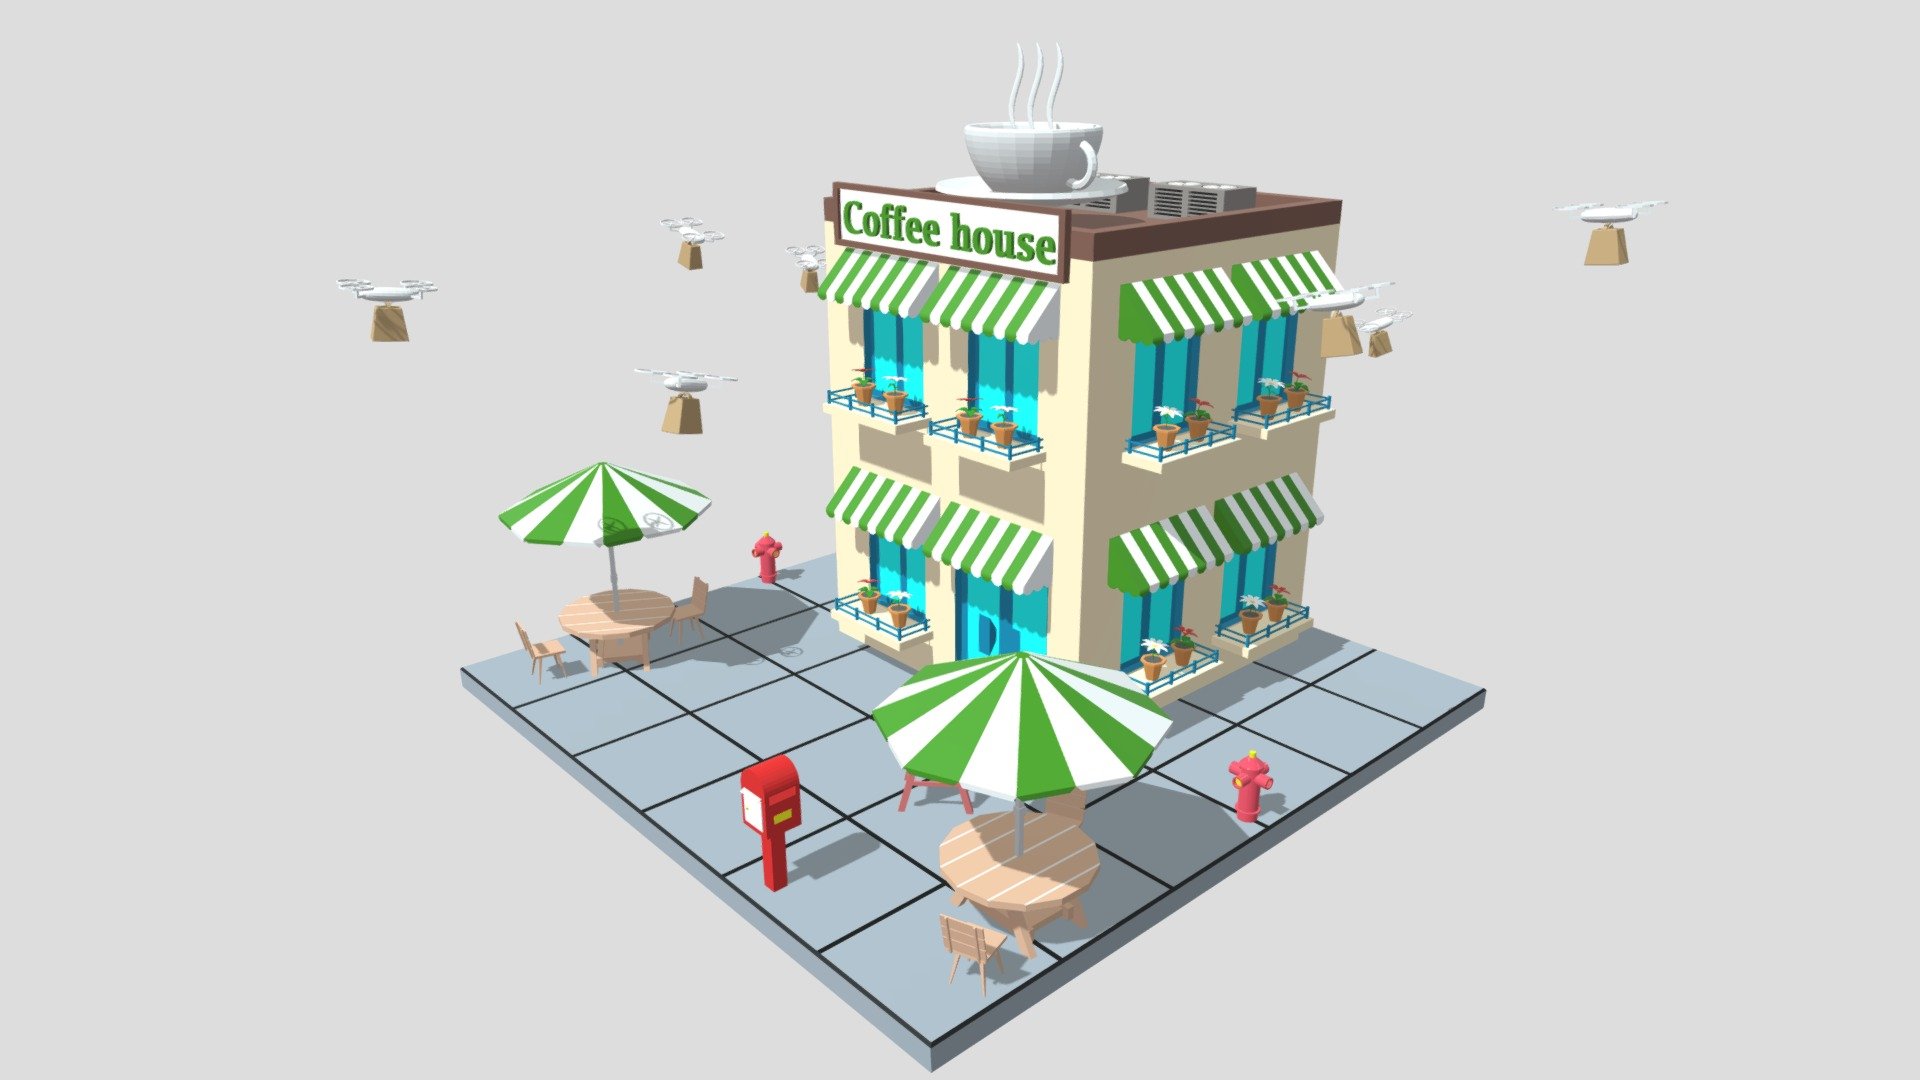 -Cartoon Coffee Shop.

-This product contains 133 models.

-This product was created in Blender 2.8.

-Total vertices: 39,564 Total polygons: 38,598.

-Formats: blend, fbx, obj, c4d, dae, fbx, unity.

-We hope you enjoy this model.

-Thank you 3d model